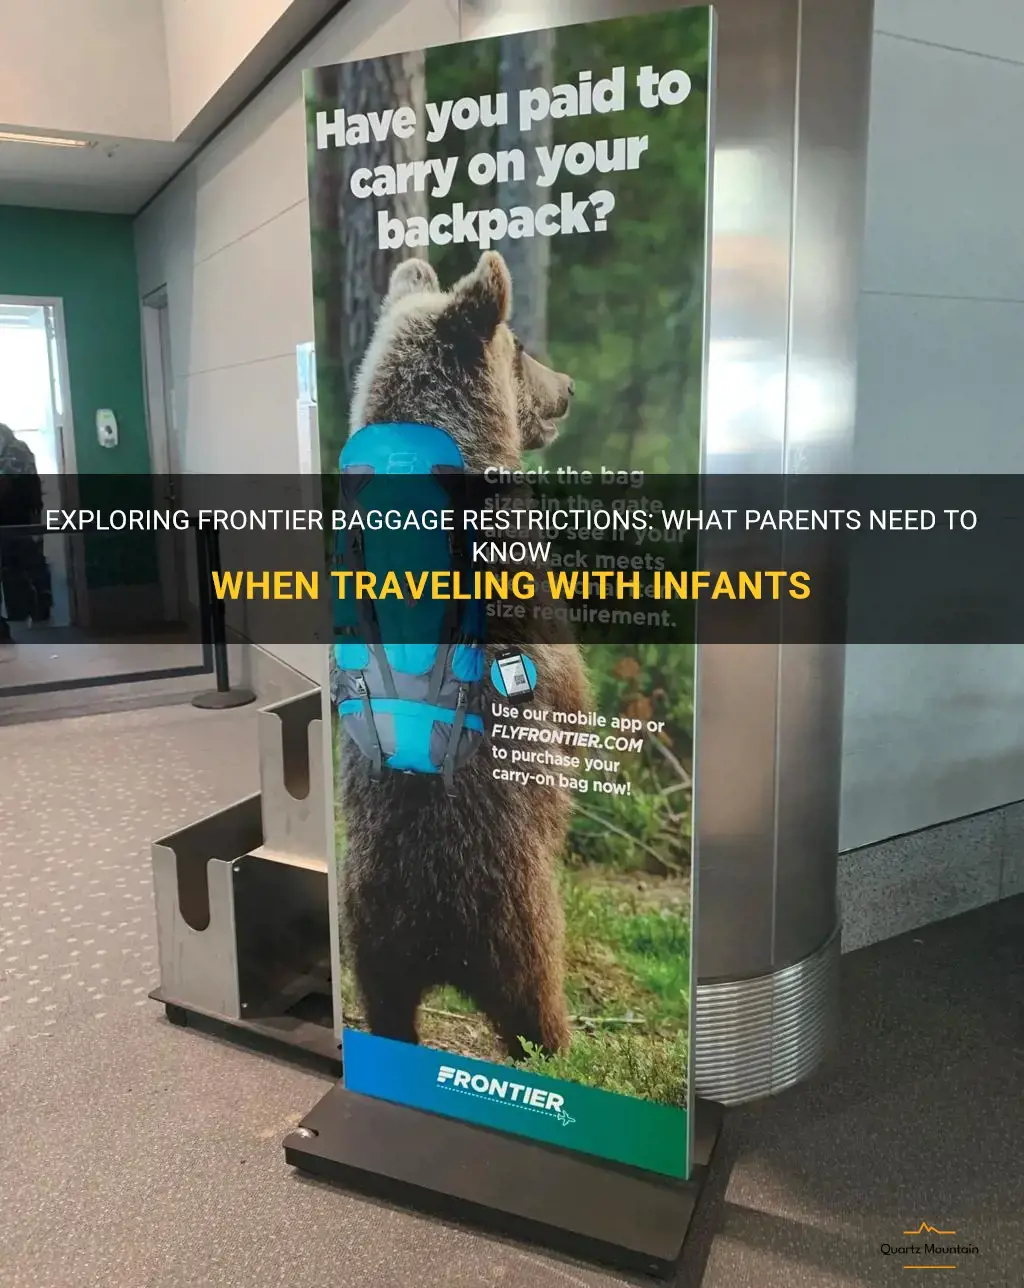 fronteir baggage restrictions for those traveling with infants